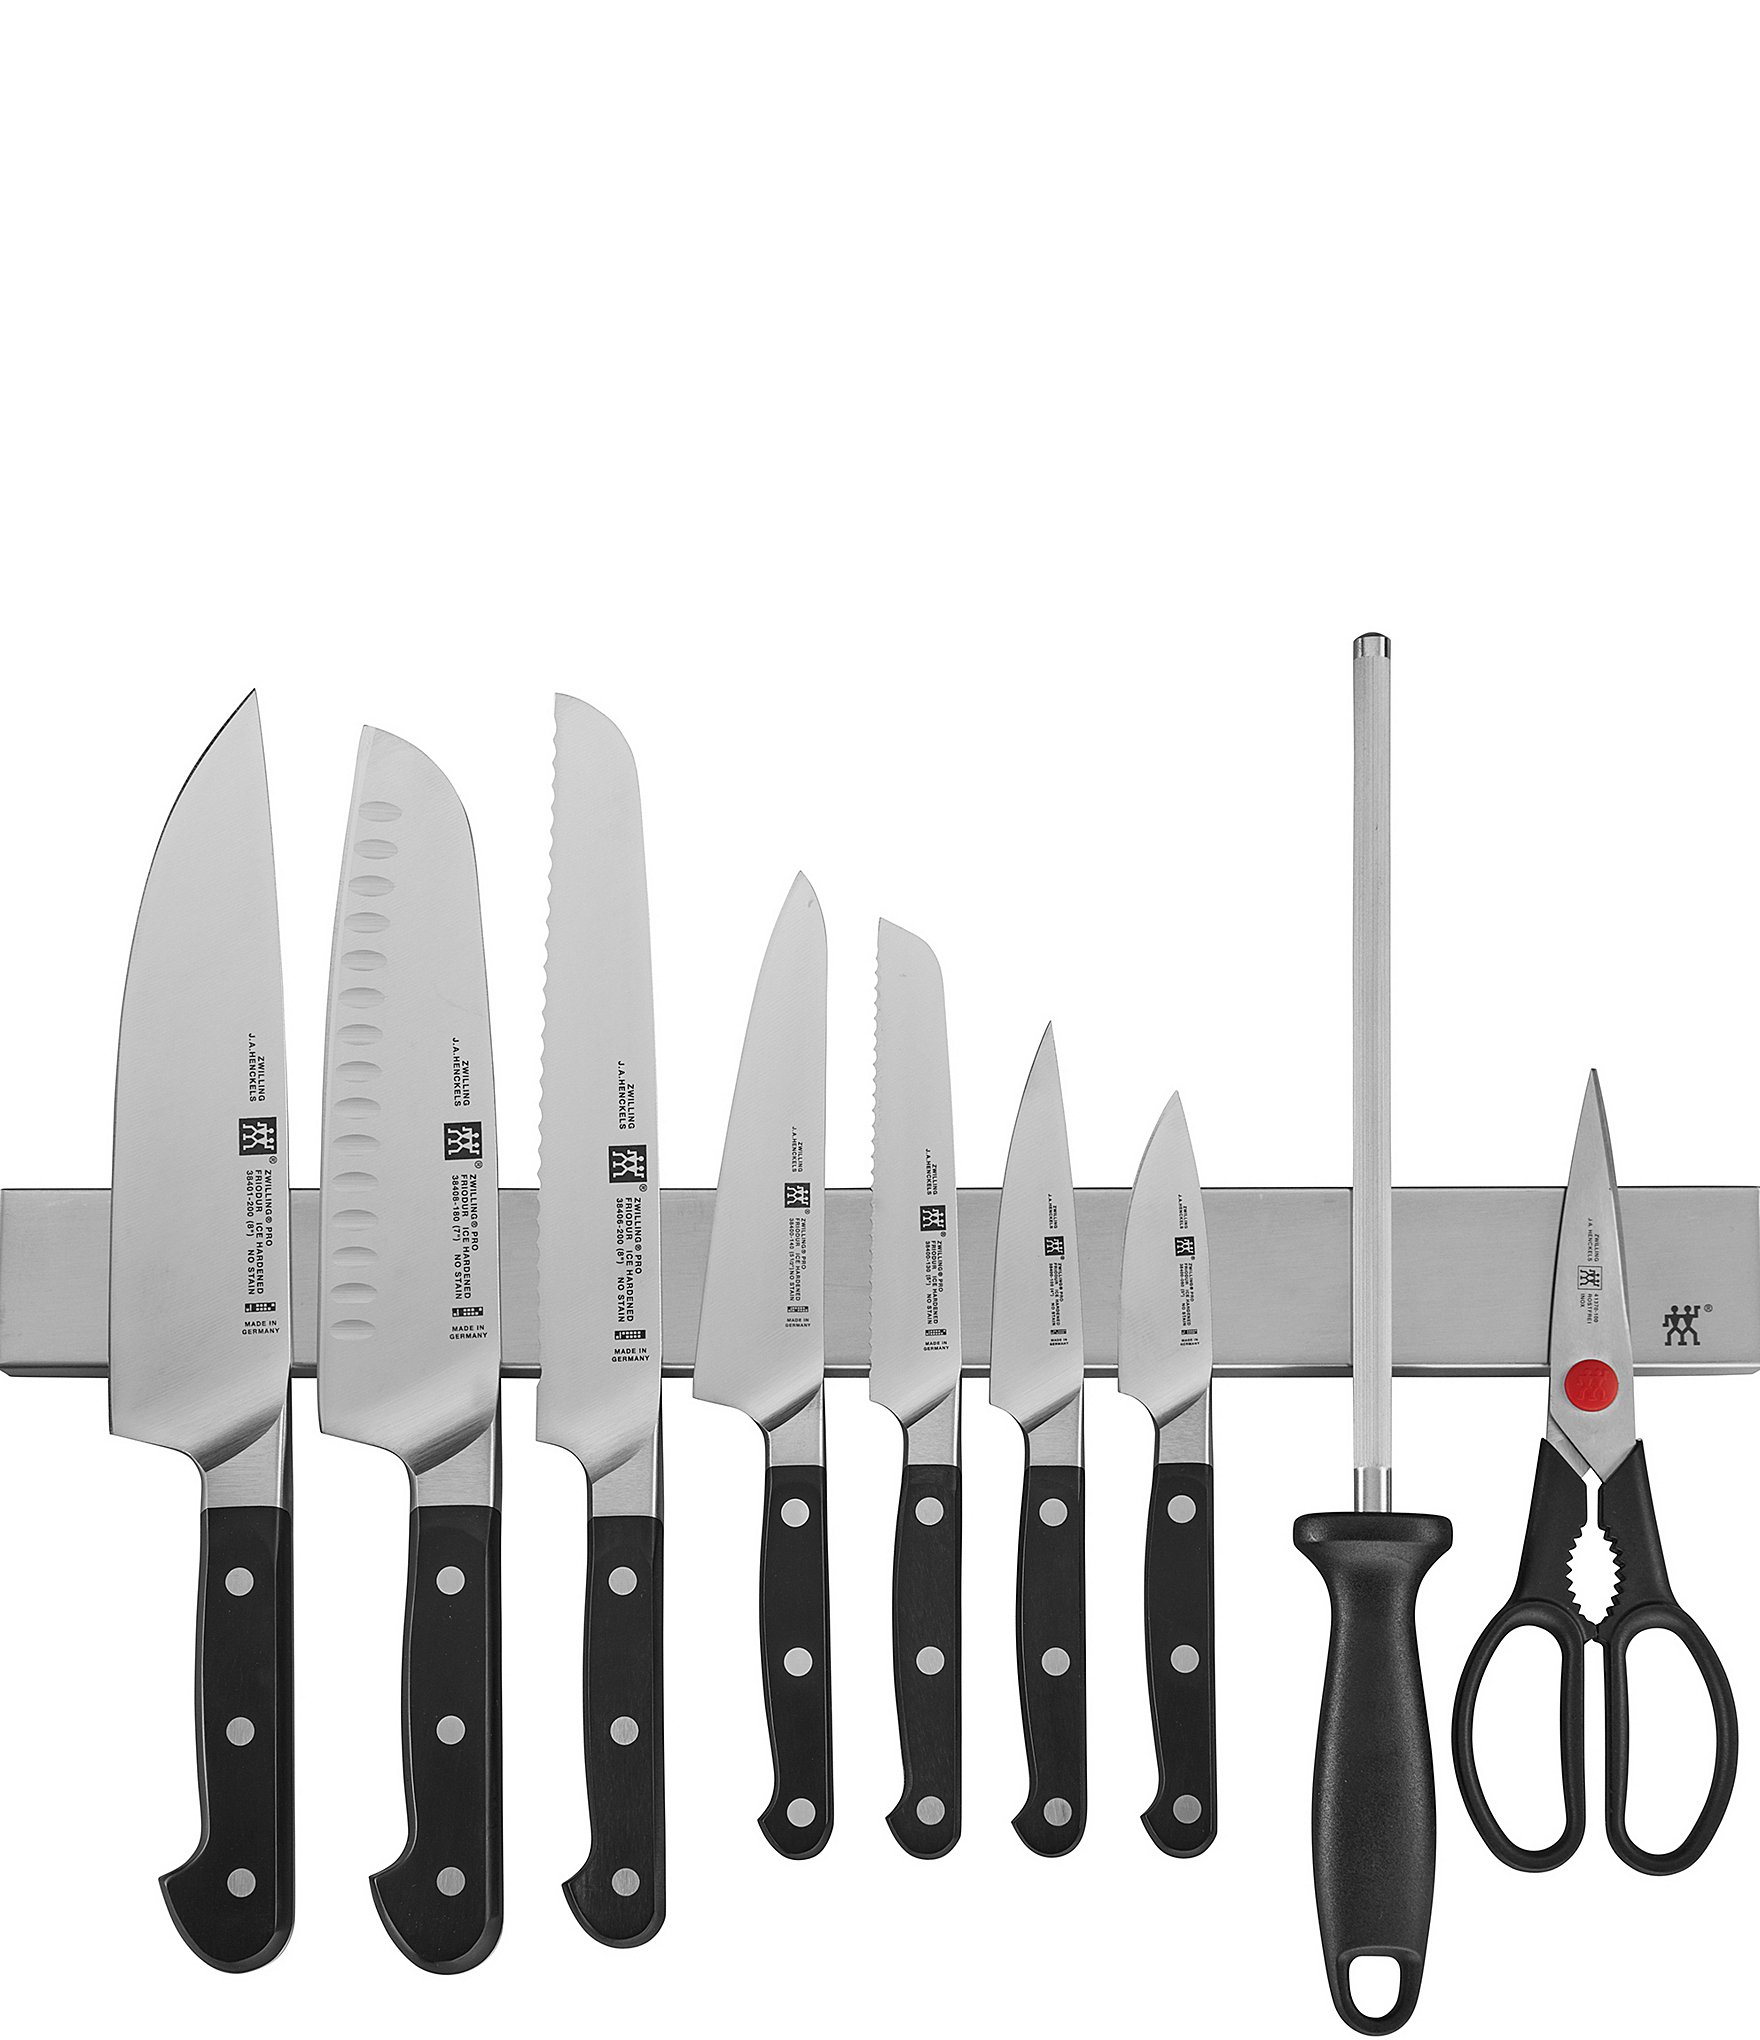 https://dimg.dillards.com/is/image/DillardsZoom/zoom/zwilling-j.a.-henckels-pro-10-piece-knife-set-with-stainless-magnetic-knife-bar/00000001_zi_05779289.jpg